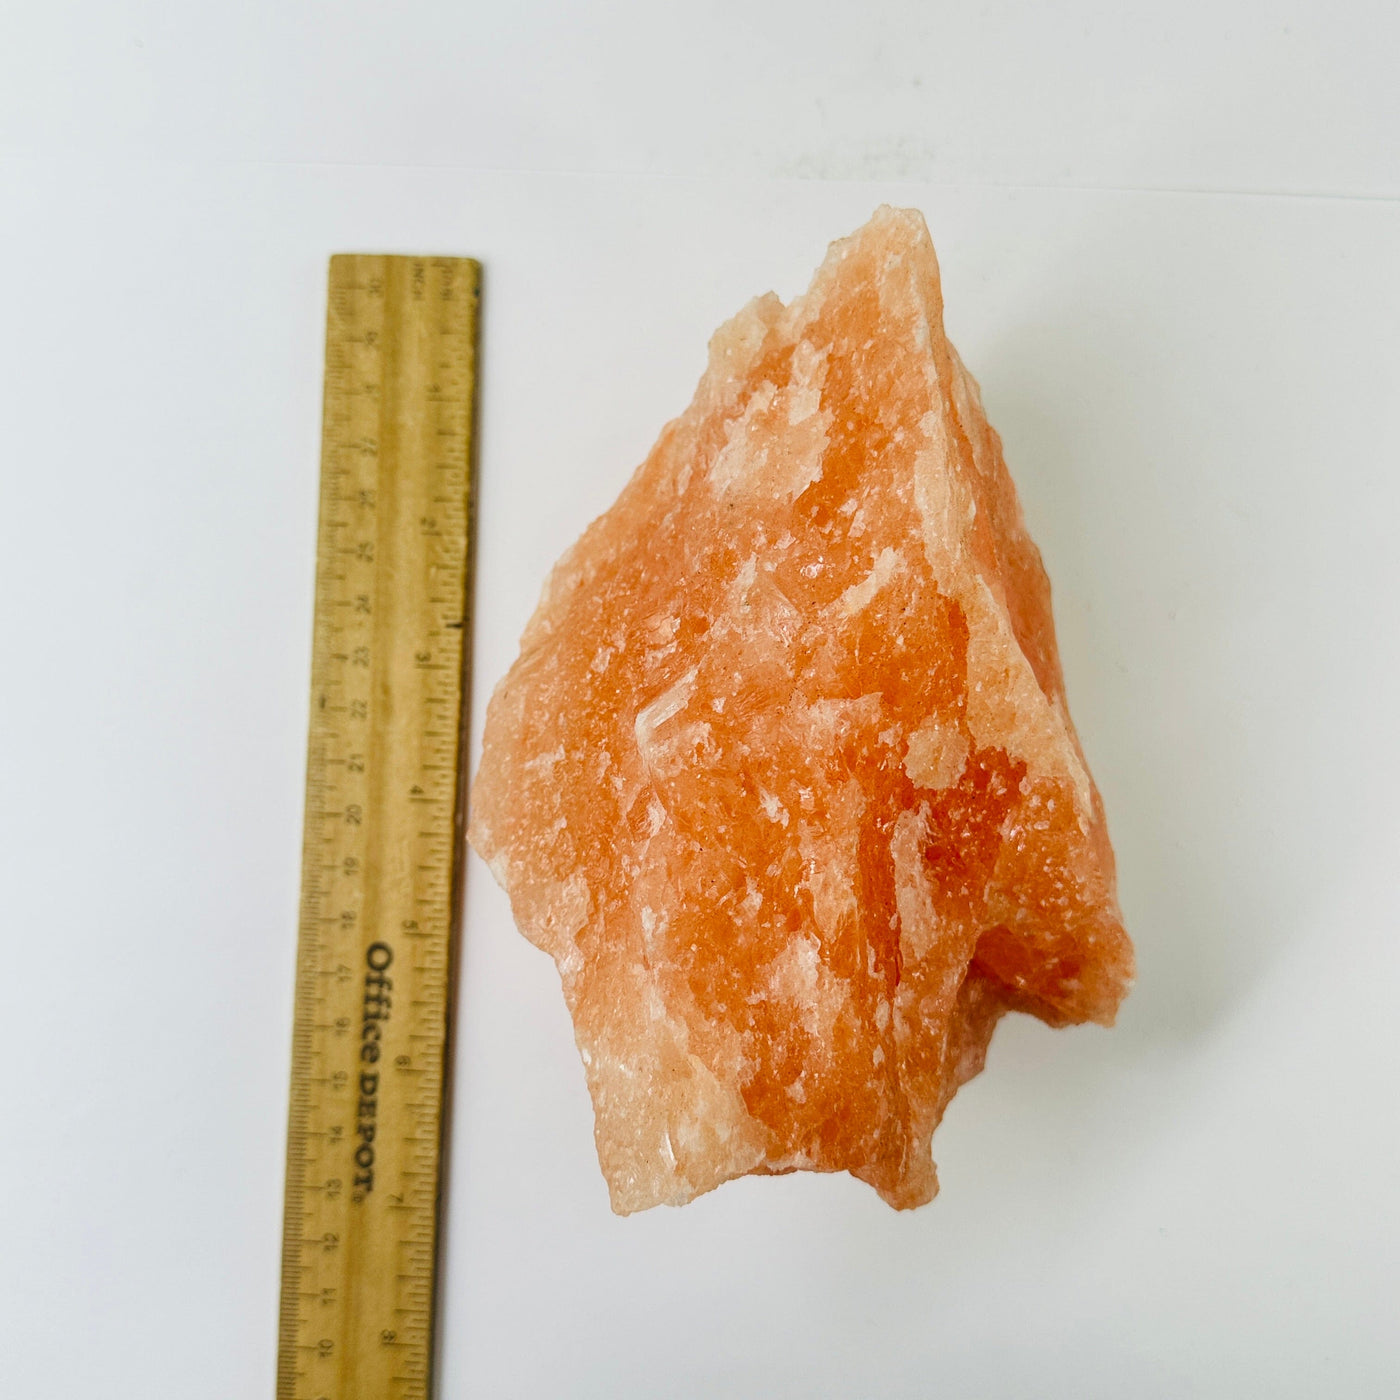 Himalayan salt cluster next to a ruler for size reference